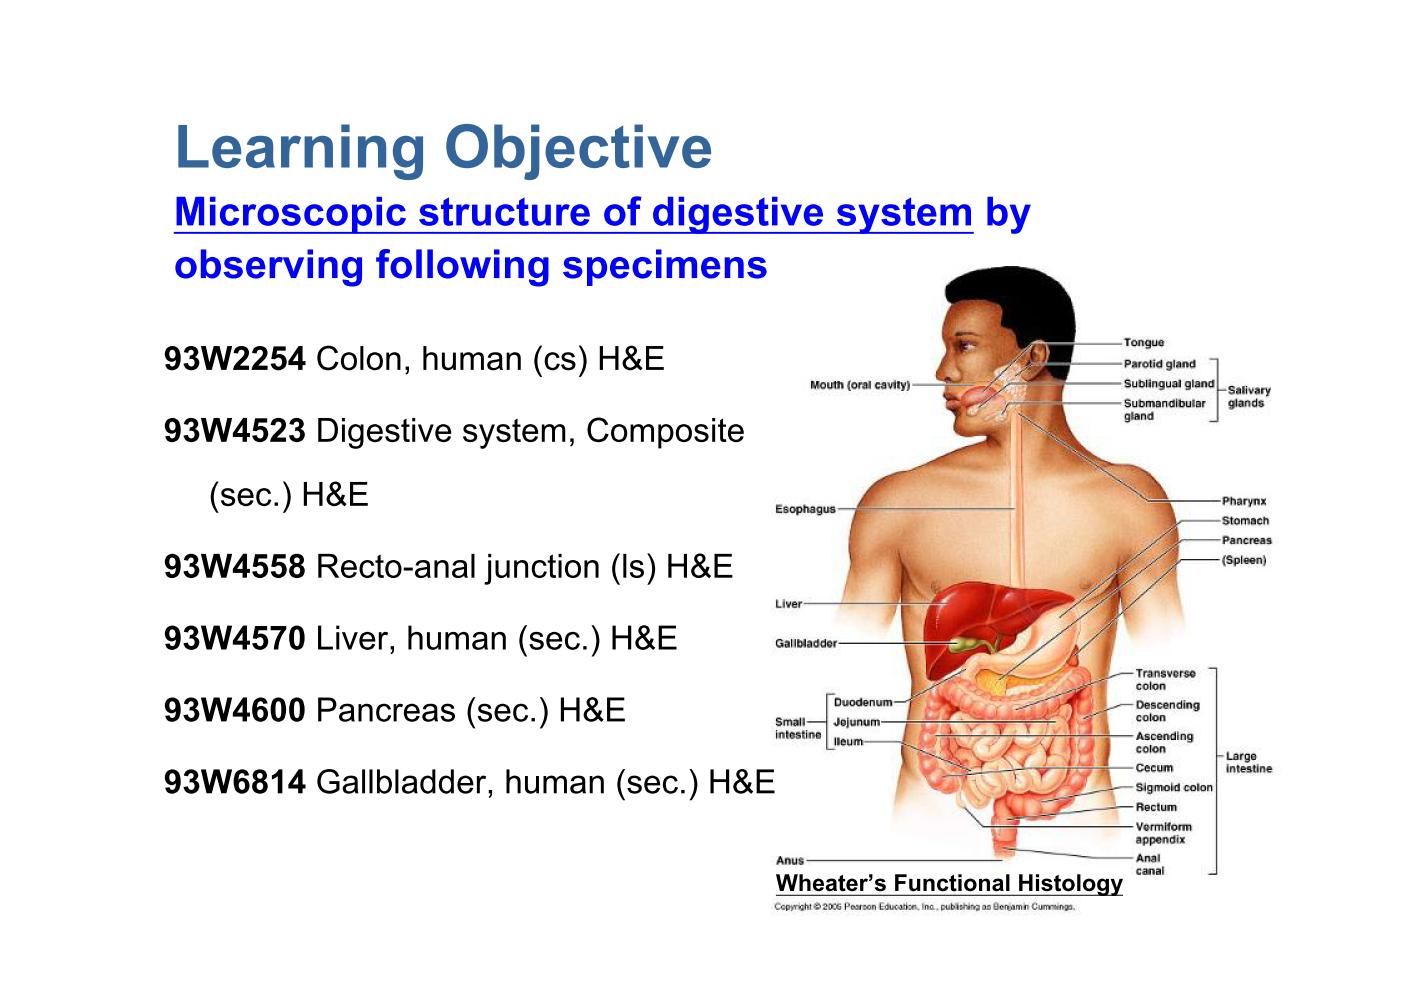 block10-2_03.jpg - Learning ObjectiveMicroscopic structure of digestive system byobserving following specimens93W2254 Colon, human (cs) H&E93W4523 Digestive system, Composite  (sec.) H&E93W4558 Recto-anal junction (ls) H&E93W4570 Liver, human (sec.) H&E93W4600 Pancreas (sec.) H&E93W6814 Gallbladder, human (sec.) H&E